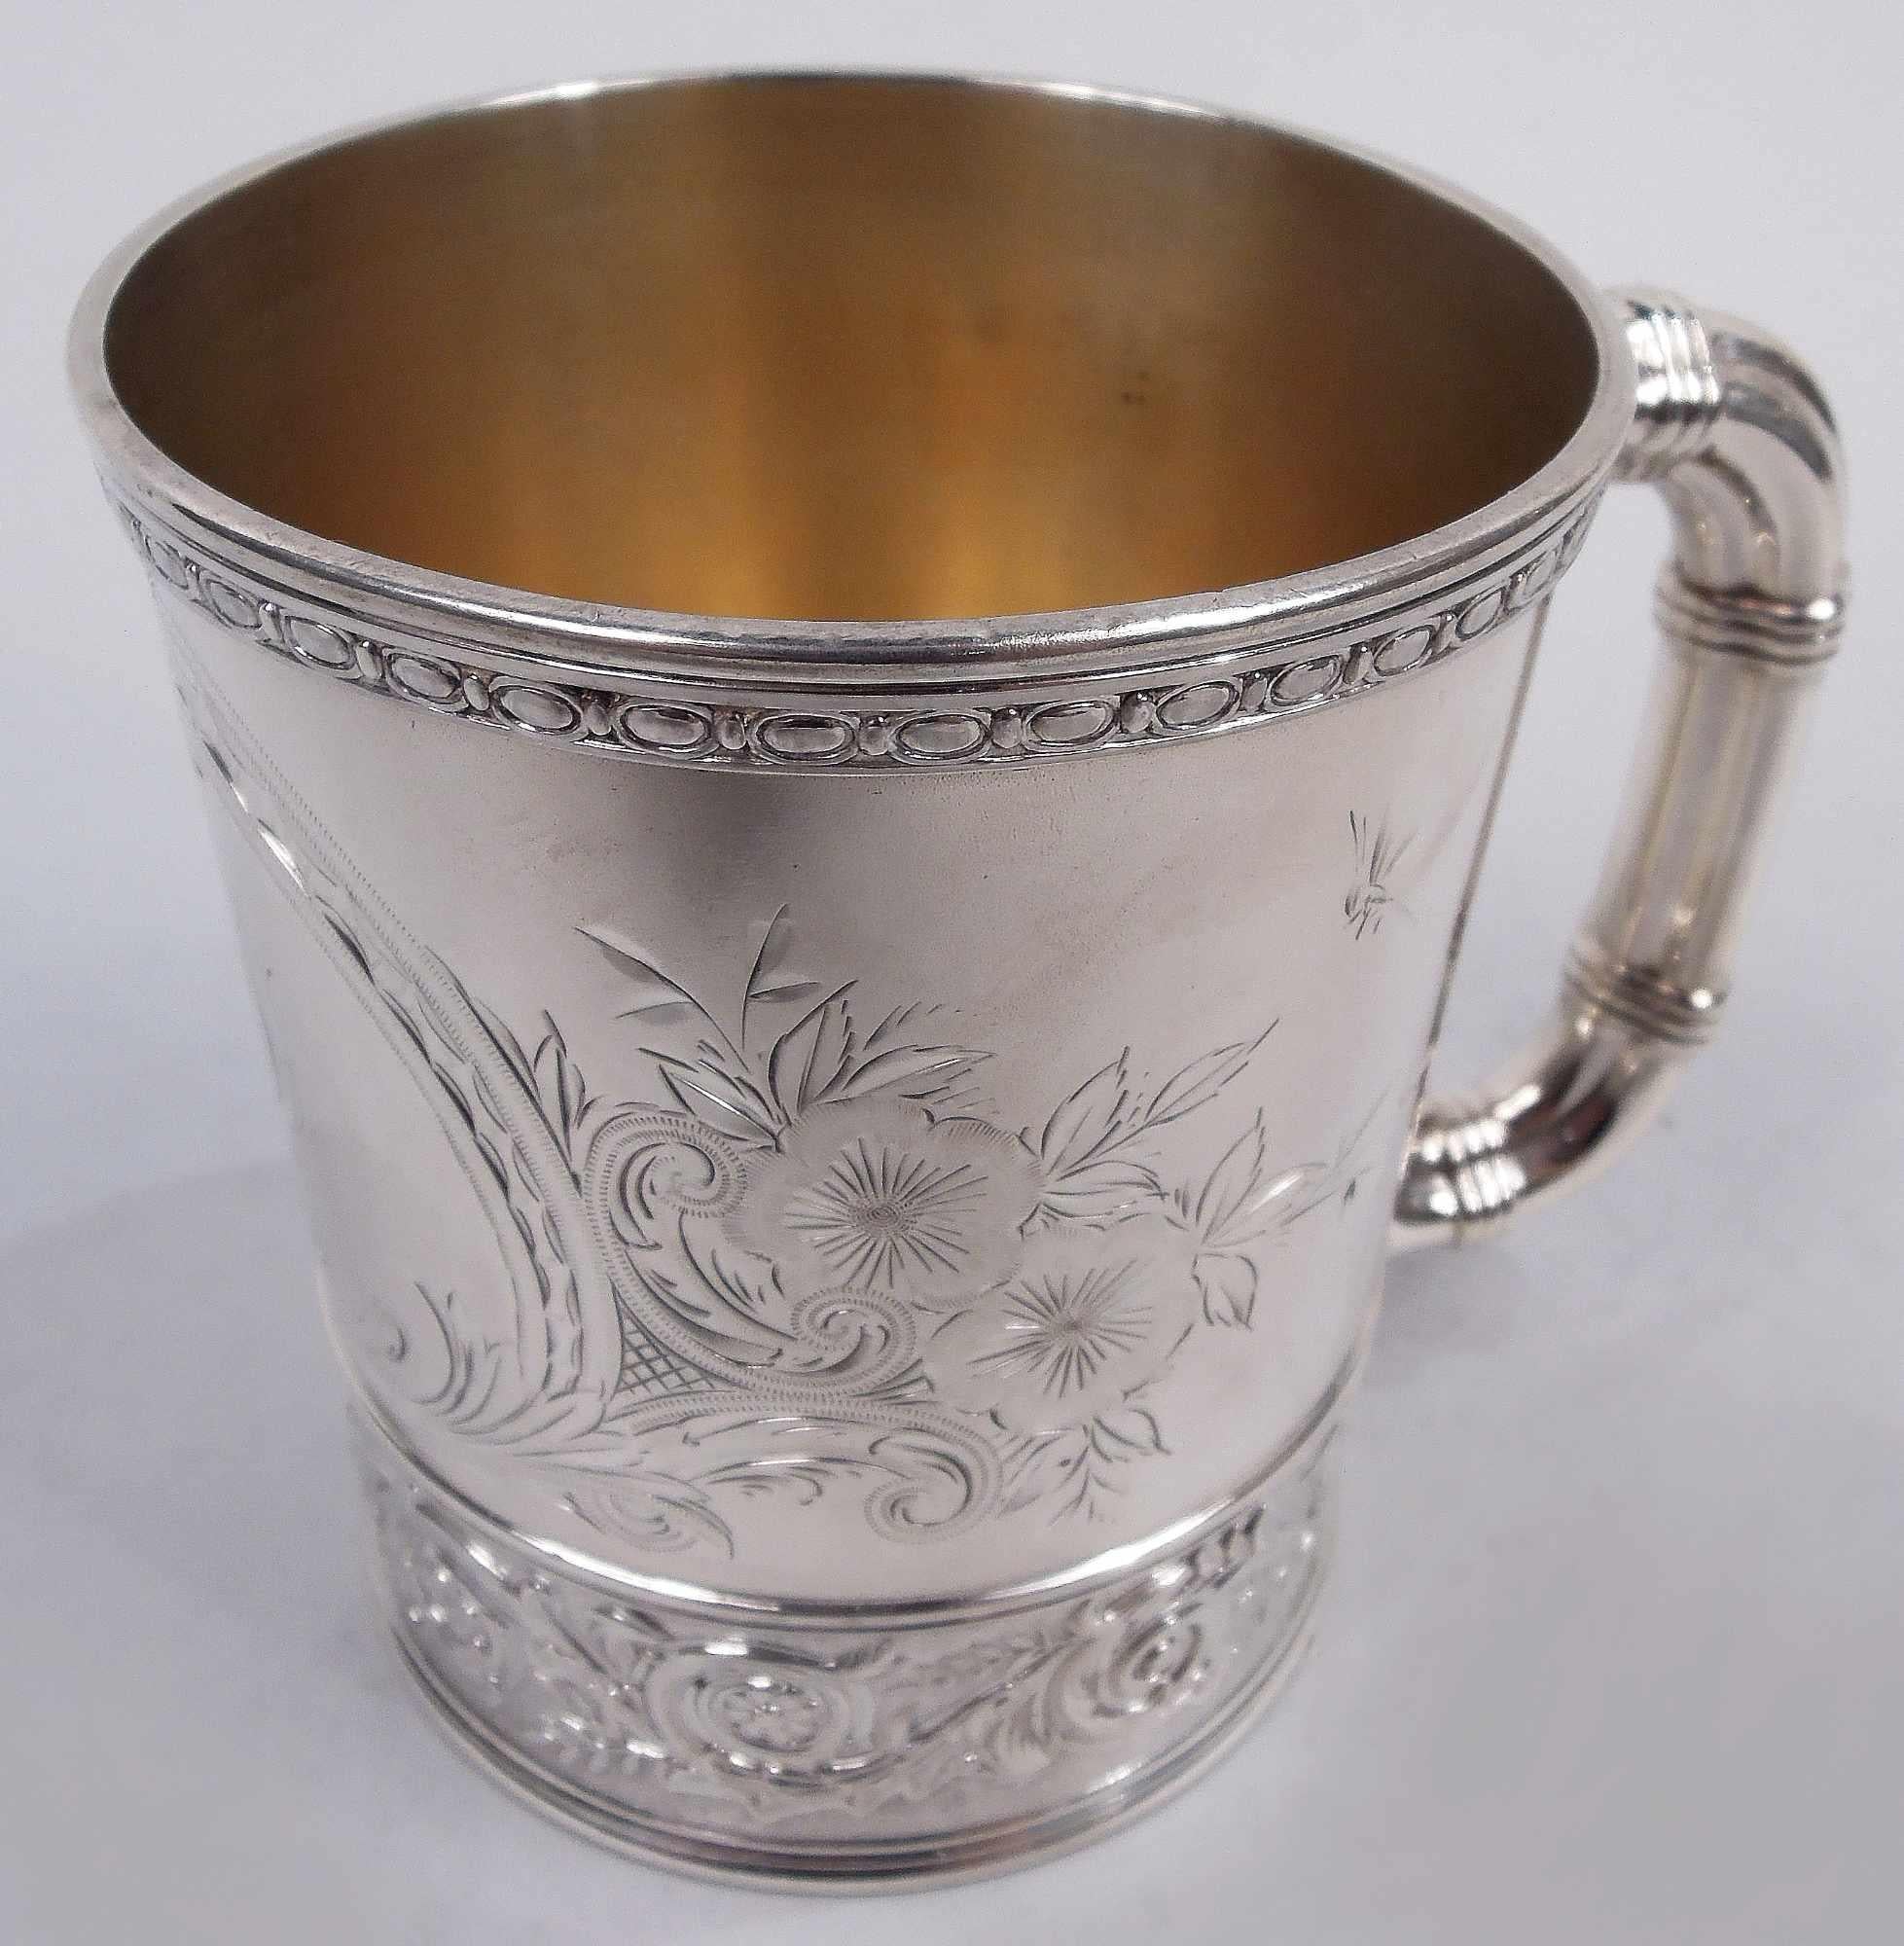 Victorian Classical sterling silver baby cup. Made by Gorham in Providence in 1888. Straight sides and lobed bracket handle with reeded bands. Stylized ornament: Scrolled frame surrounded by scrolls, leaves, flowers, and a couple hovering insects.